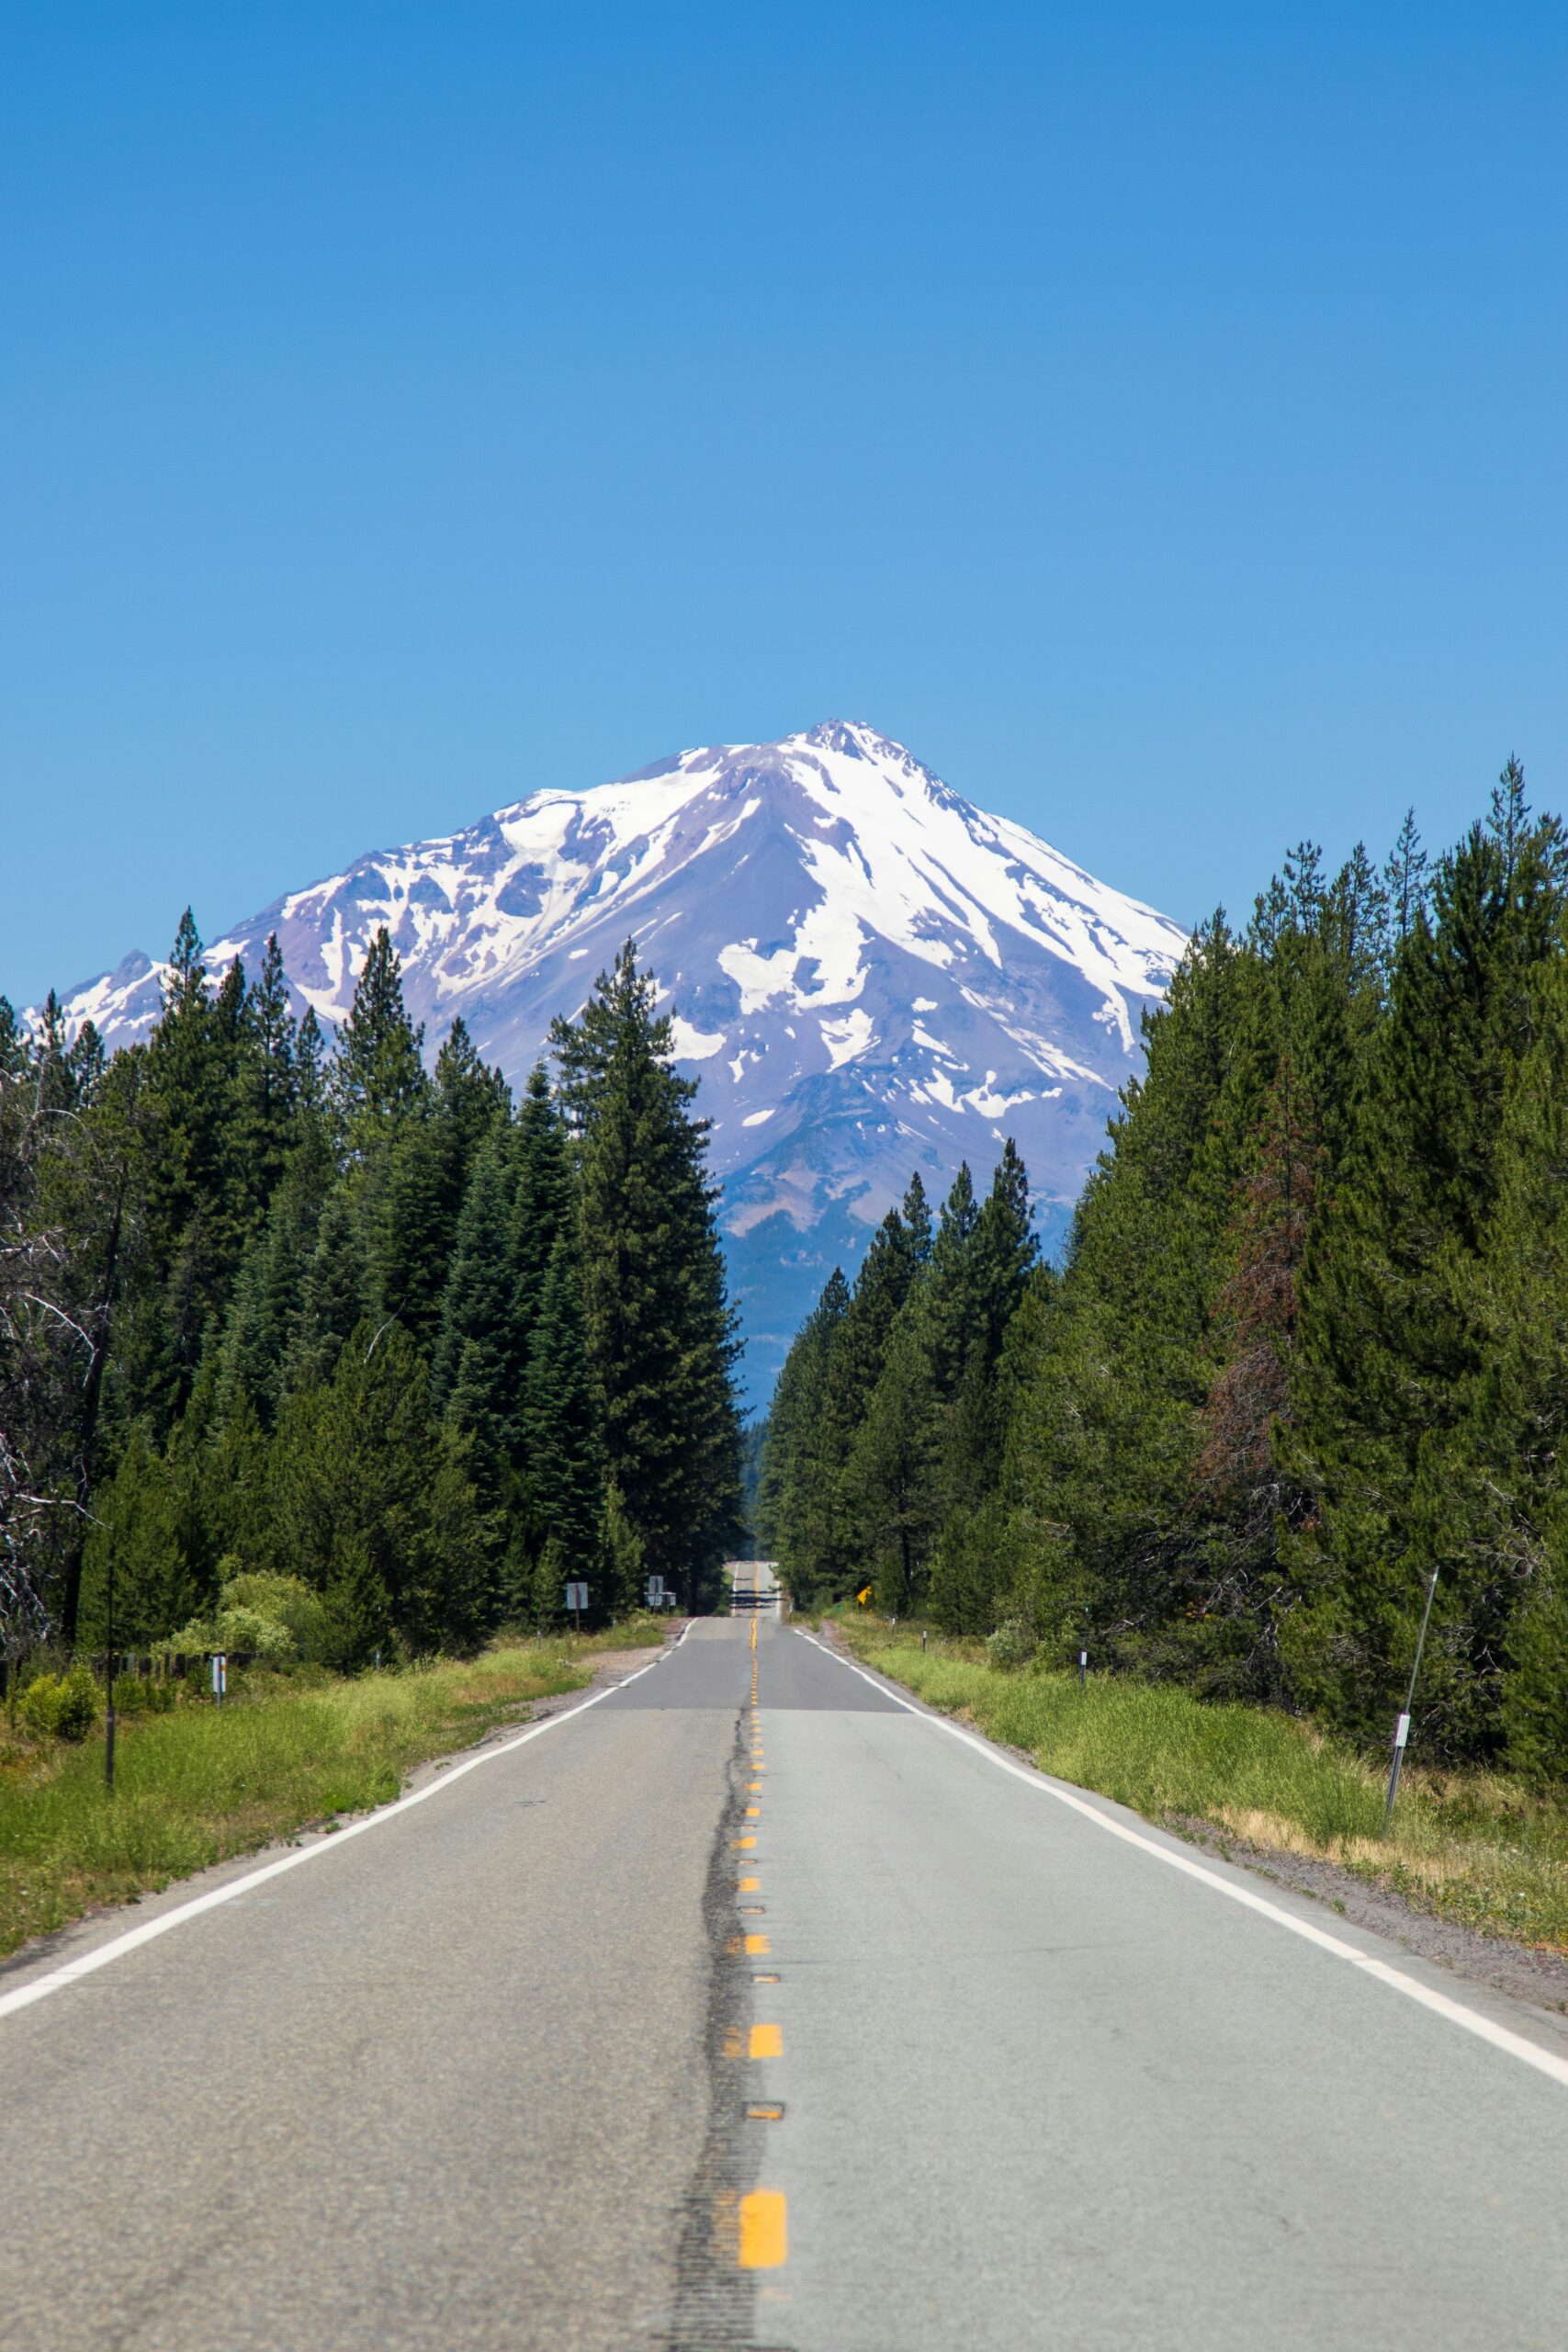 What Are The Different Climbing Routes On Mount Shasta?